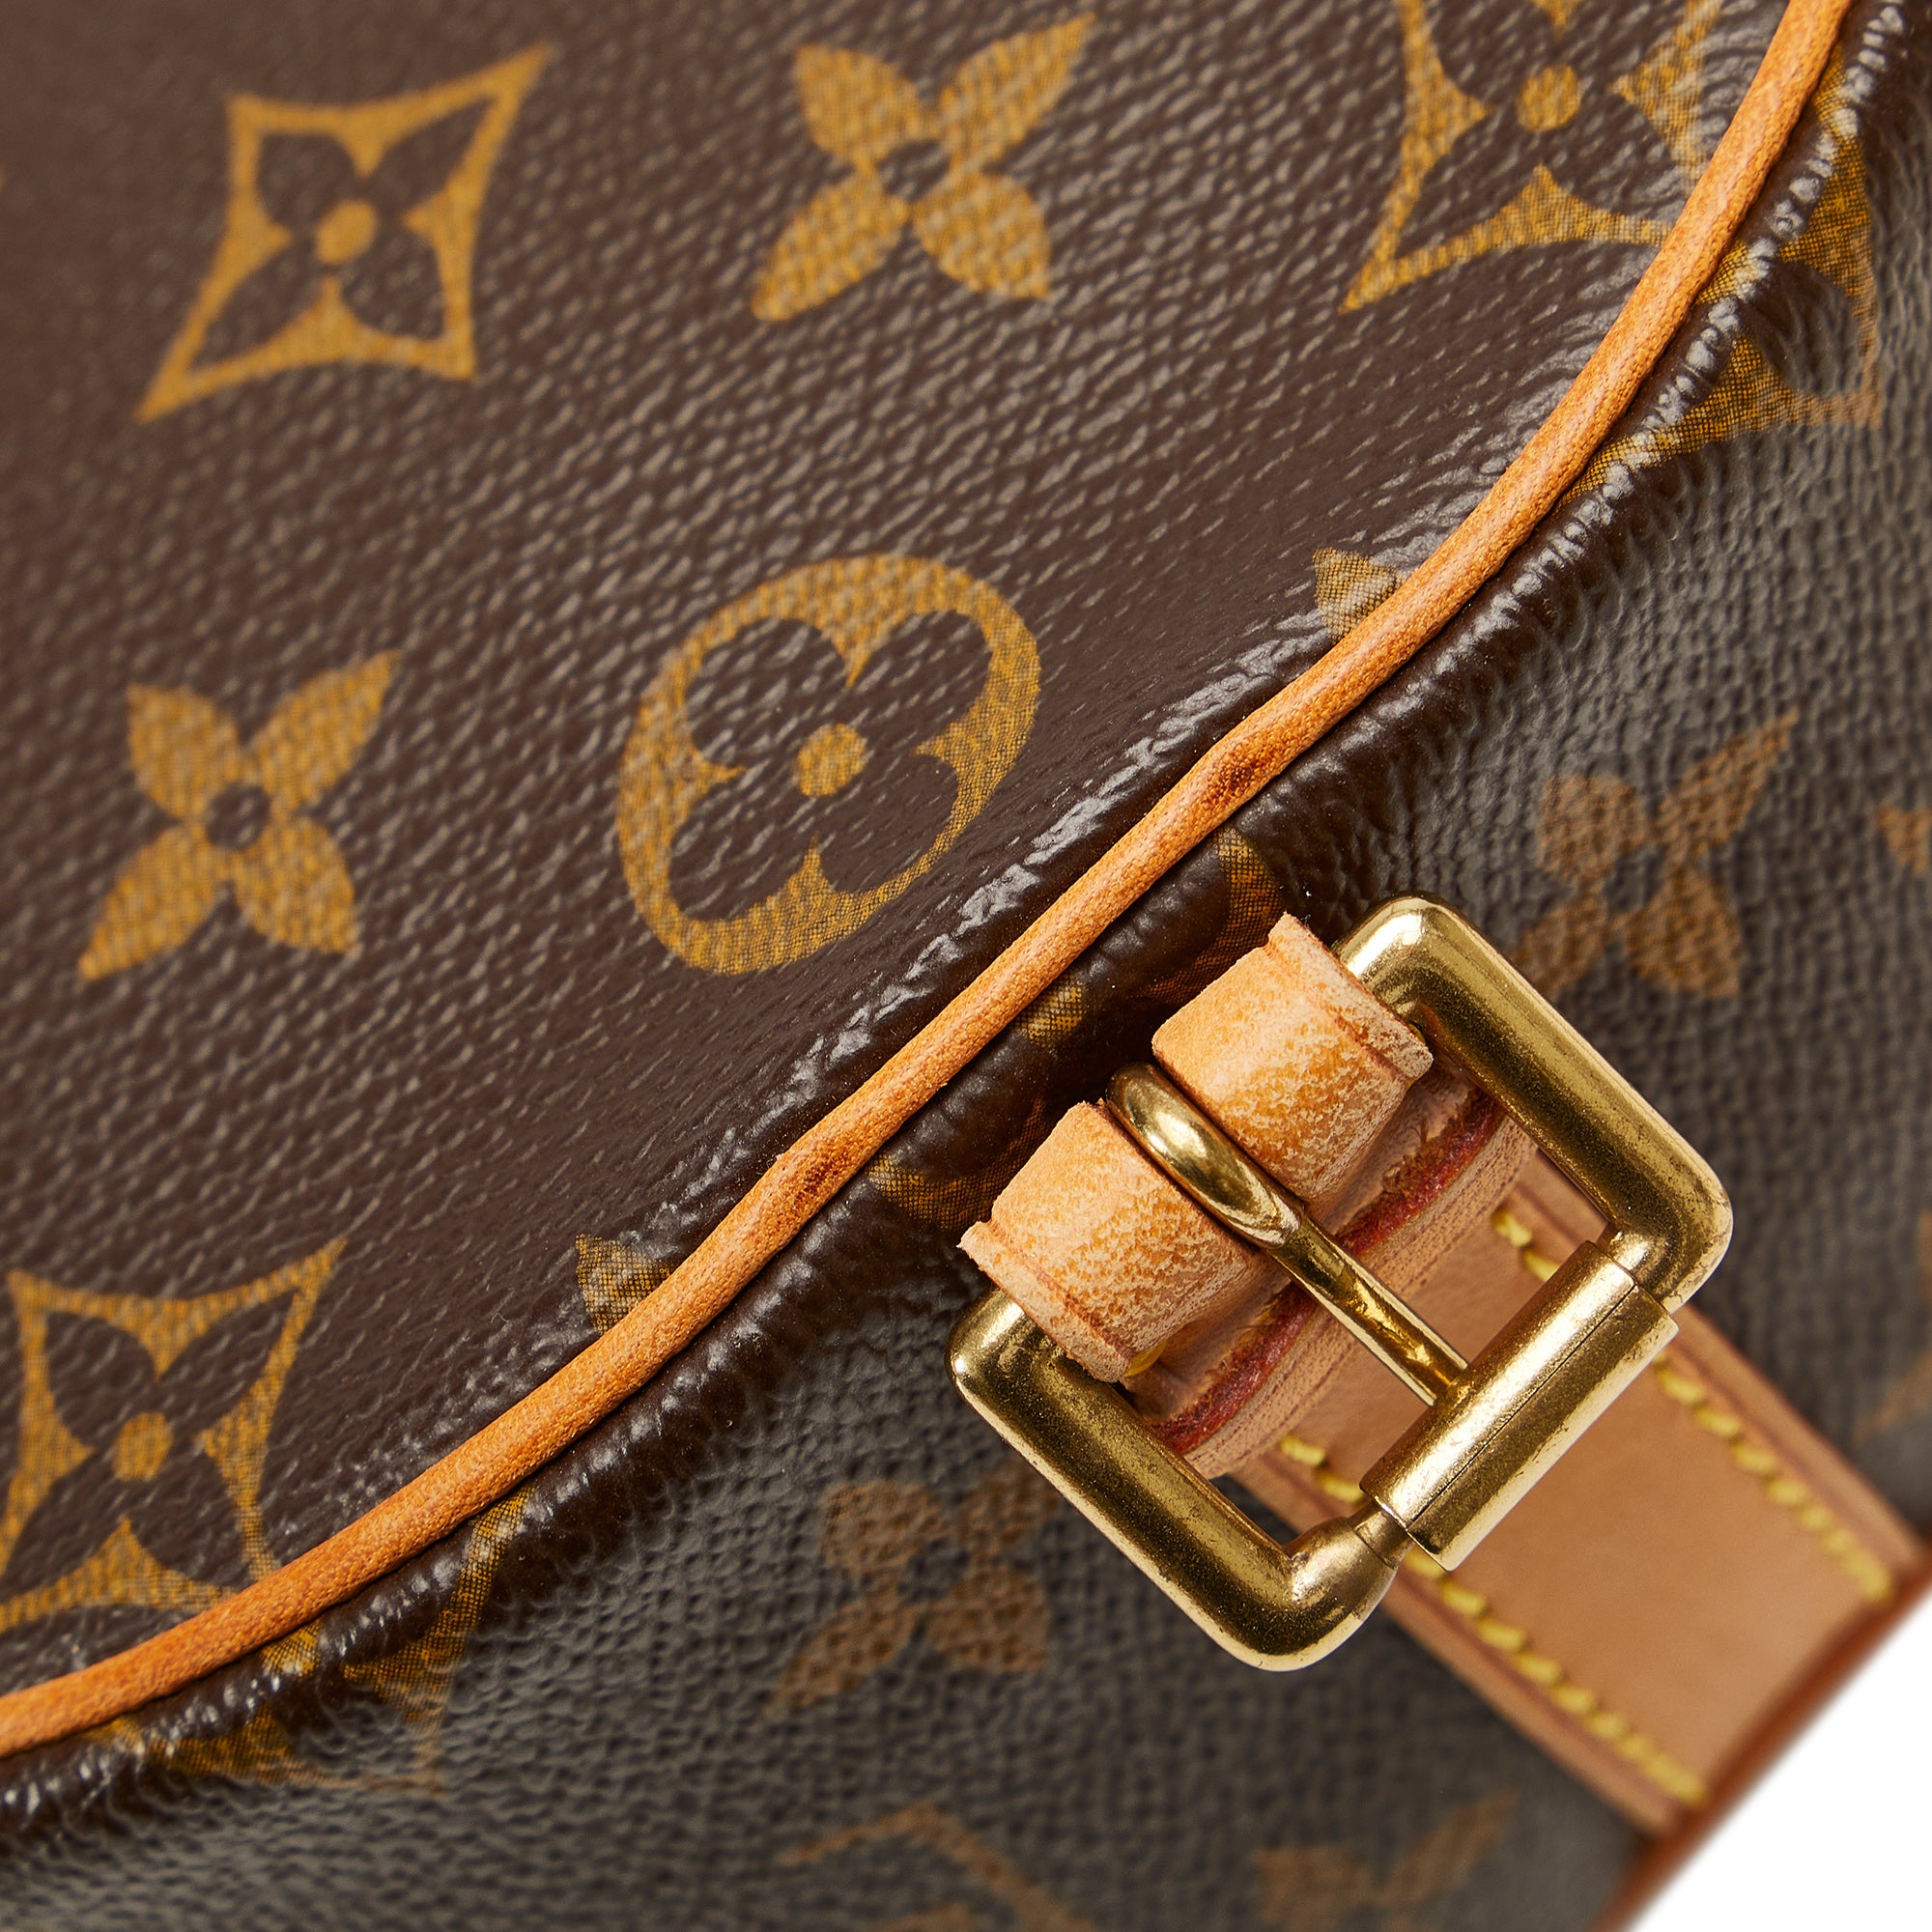 Tambourin leather crossbody bag Louis Vuitton Brown in Leather - 36082182